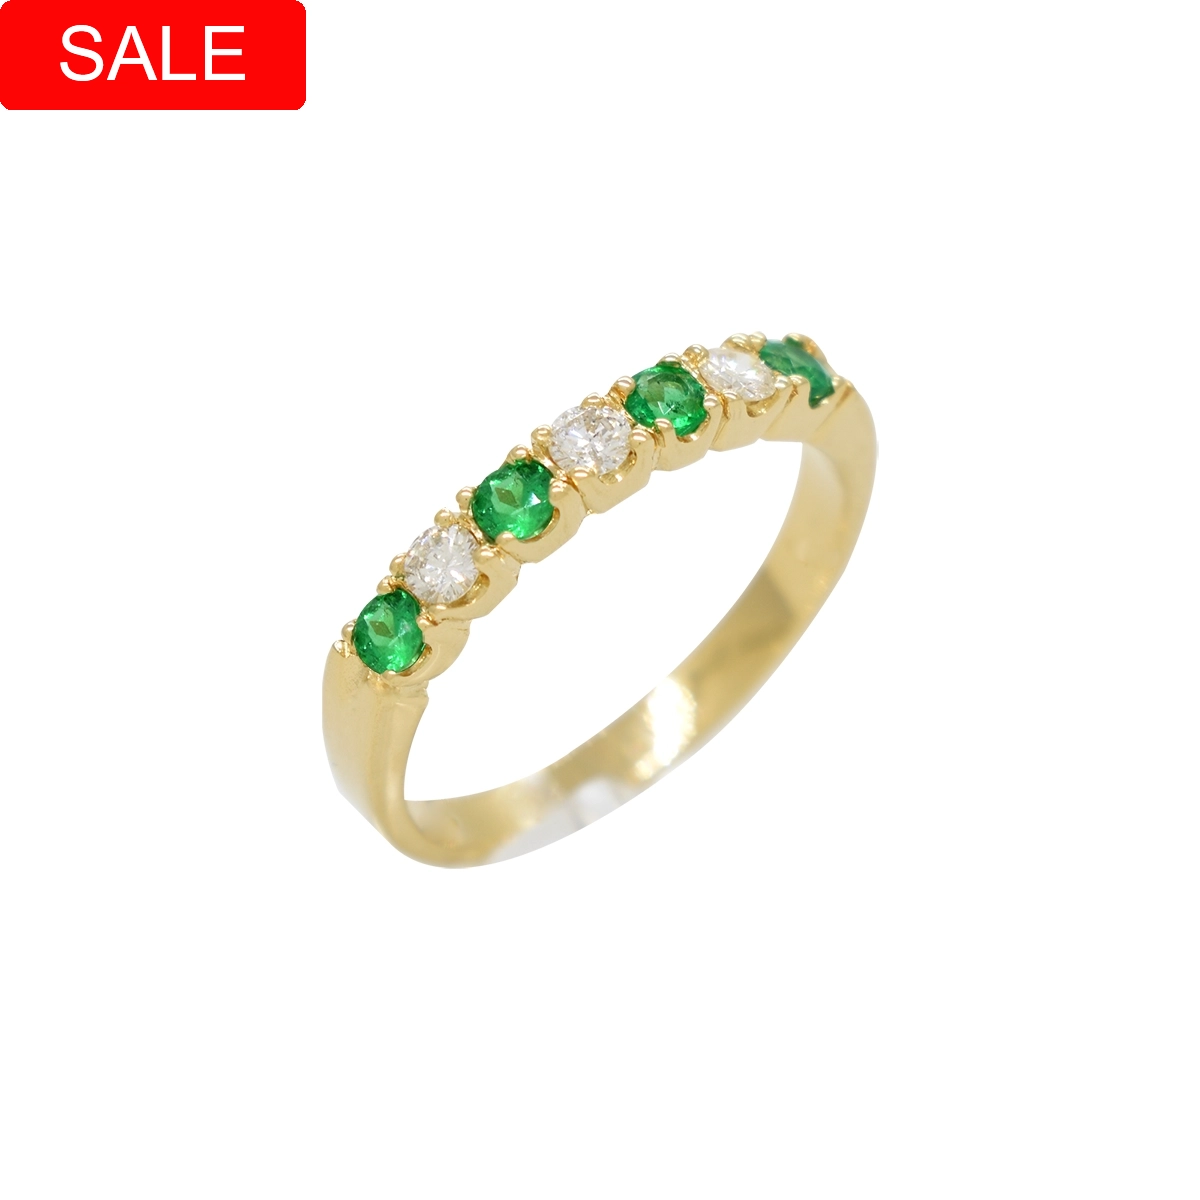 Emerald and diamond wedding band ring, custom made in 18K gold with 4 round cut natural emeralds in 0.24 Ct. t.w. and 3 round cut diamonds in 0.18 Ct. t.w.